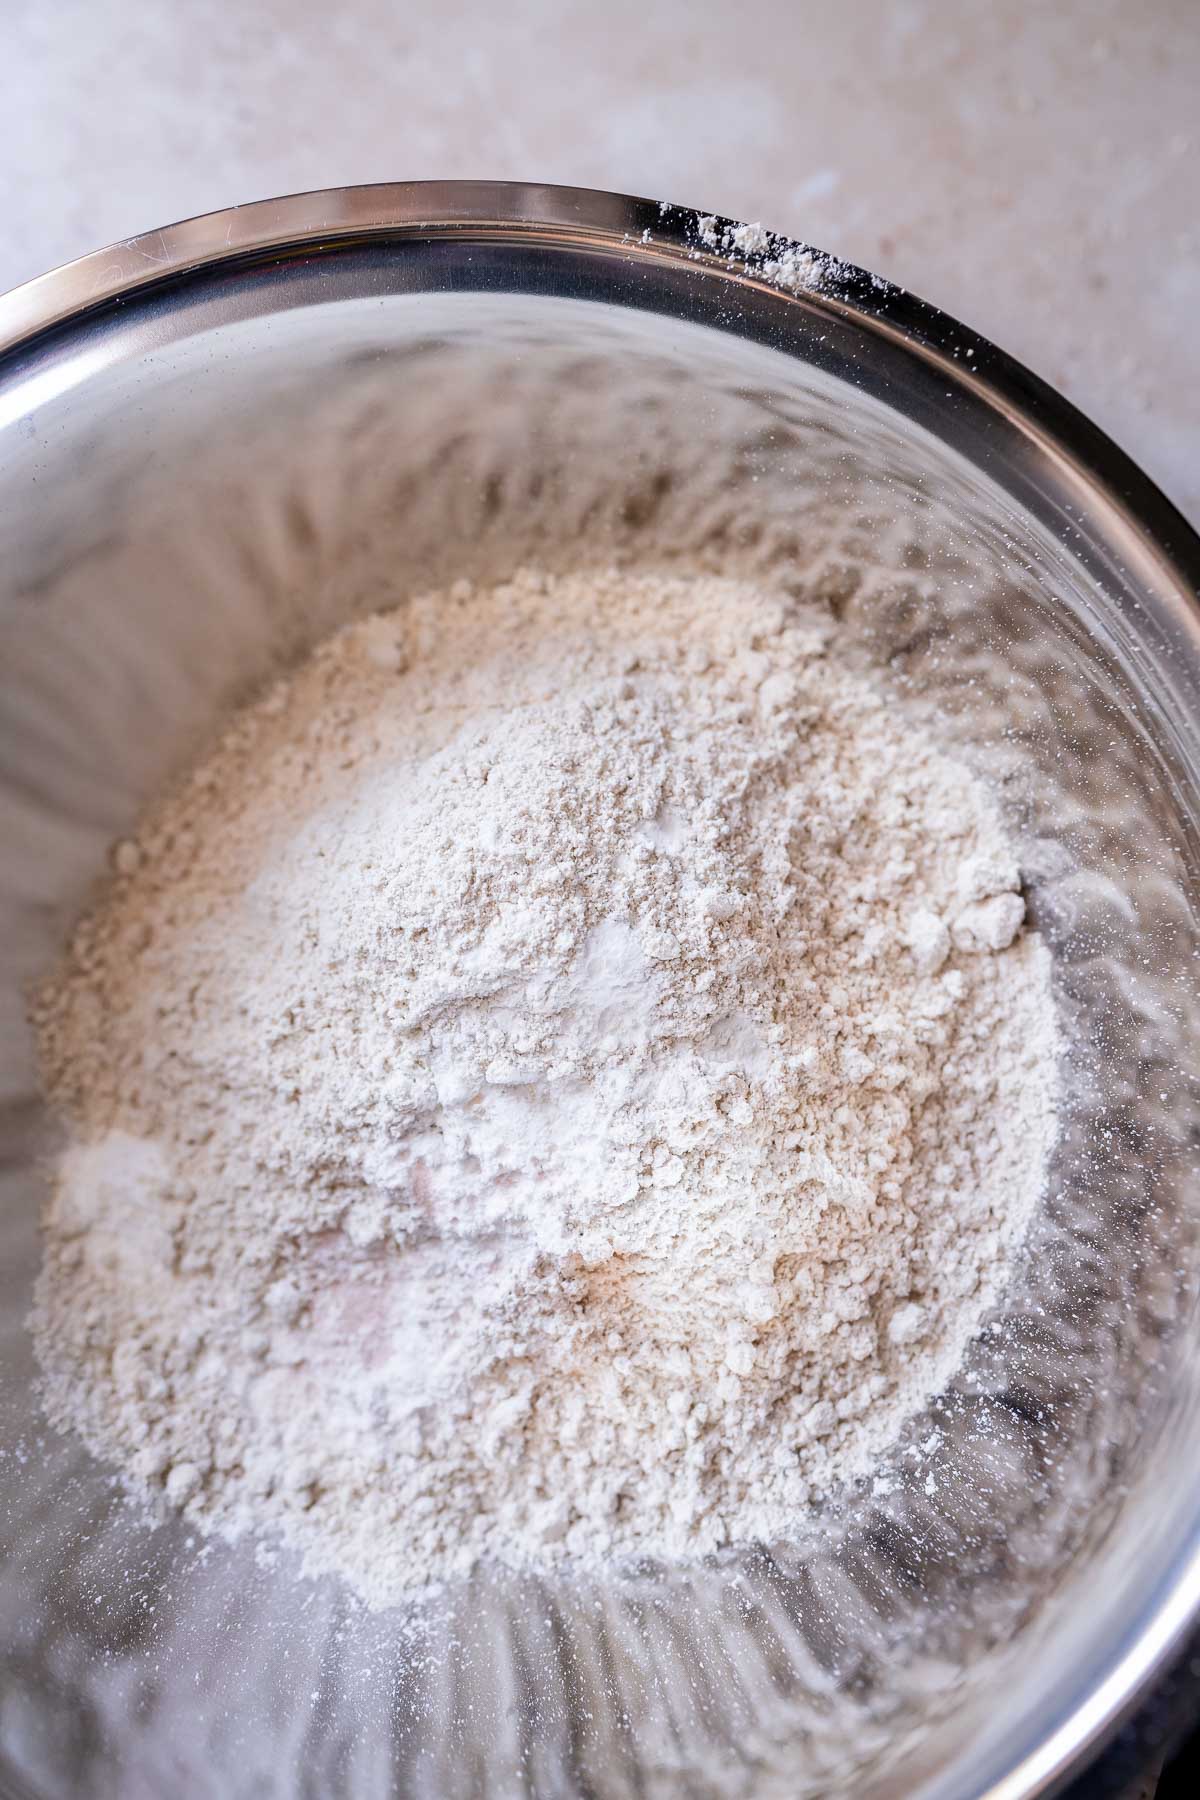 A silver mixing bowl filled with white flour and other dry ingredients.